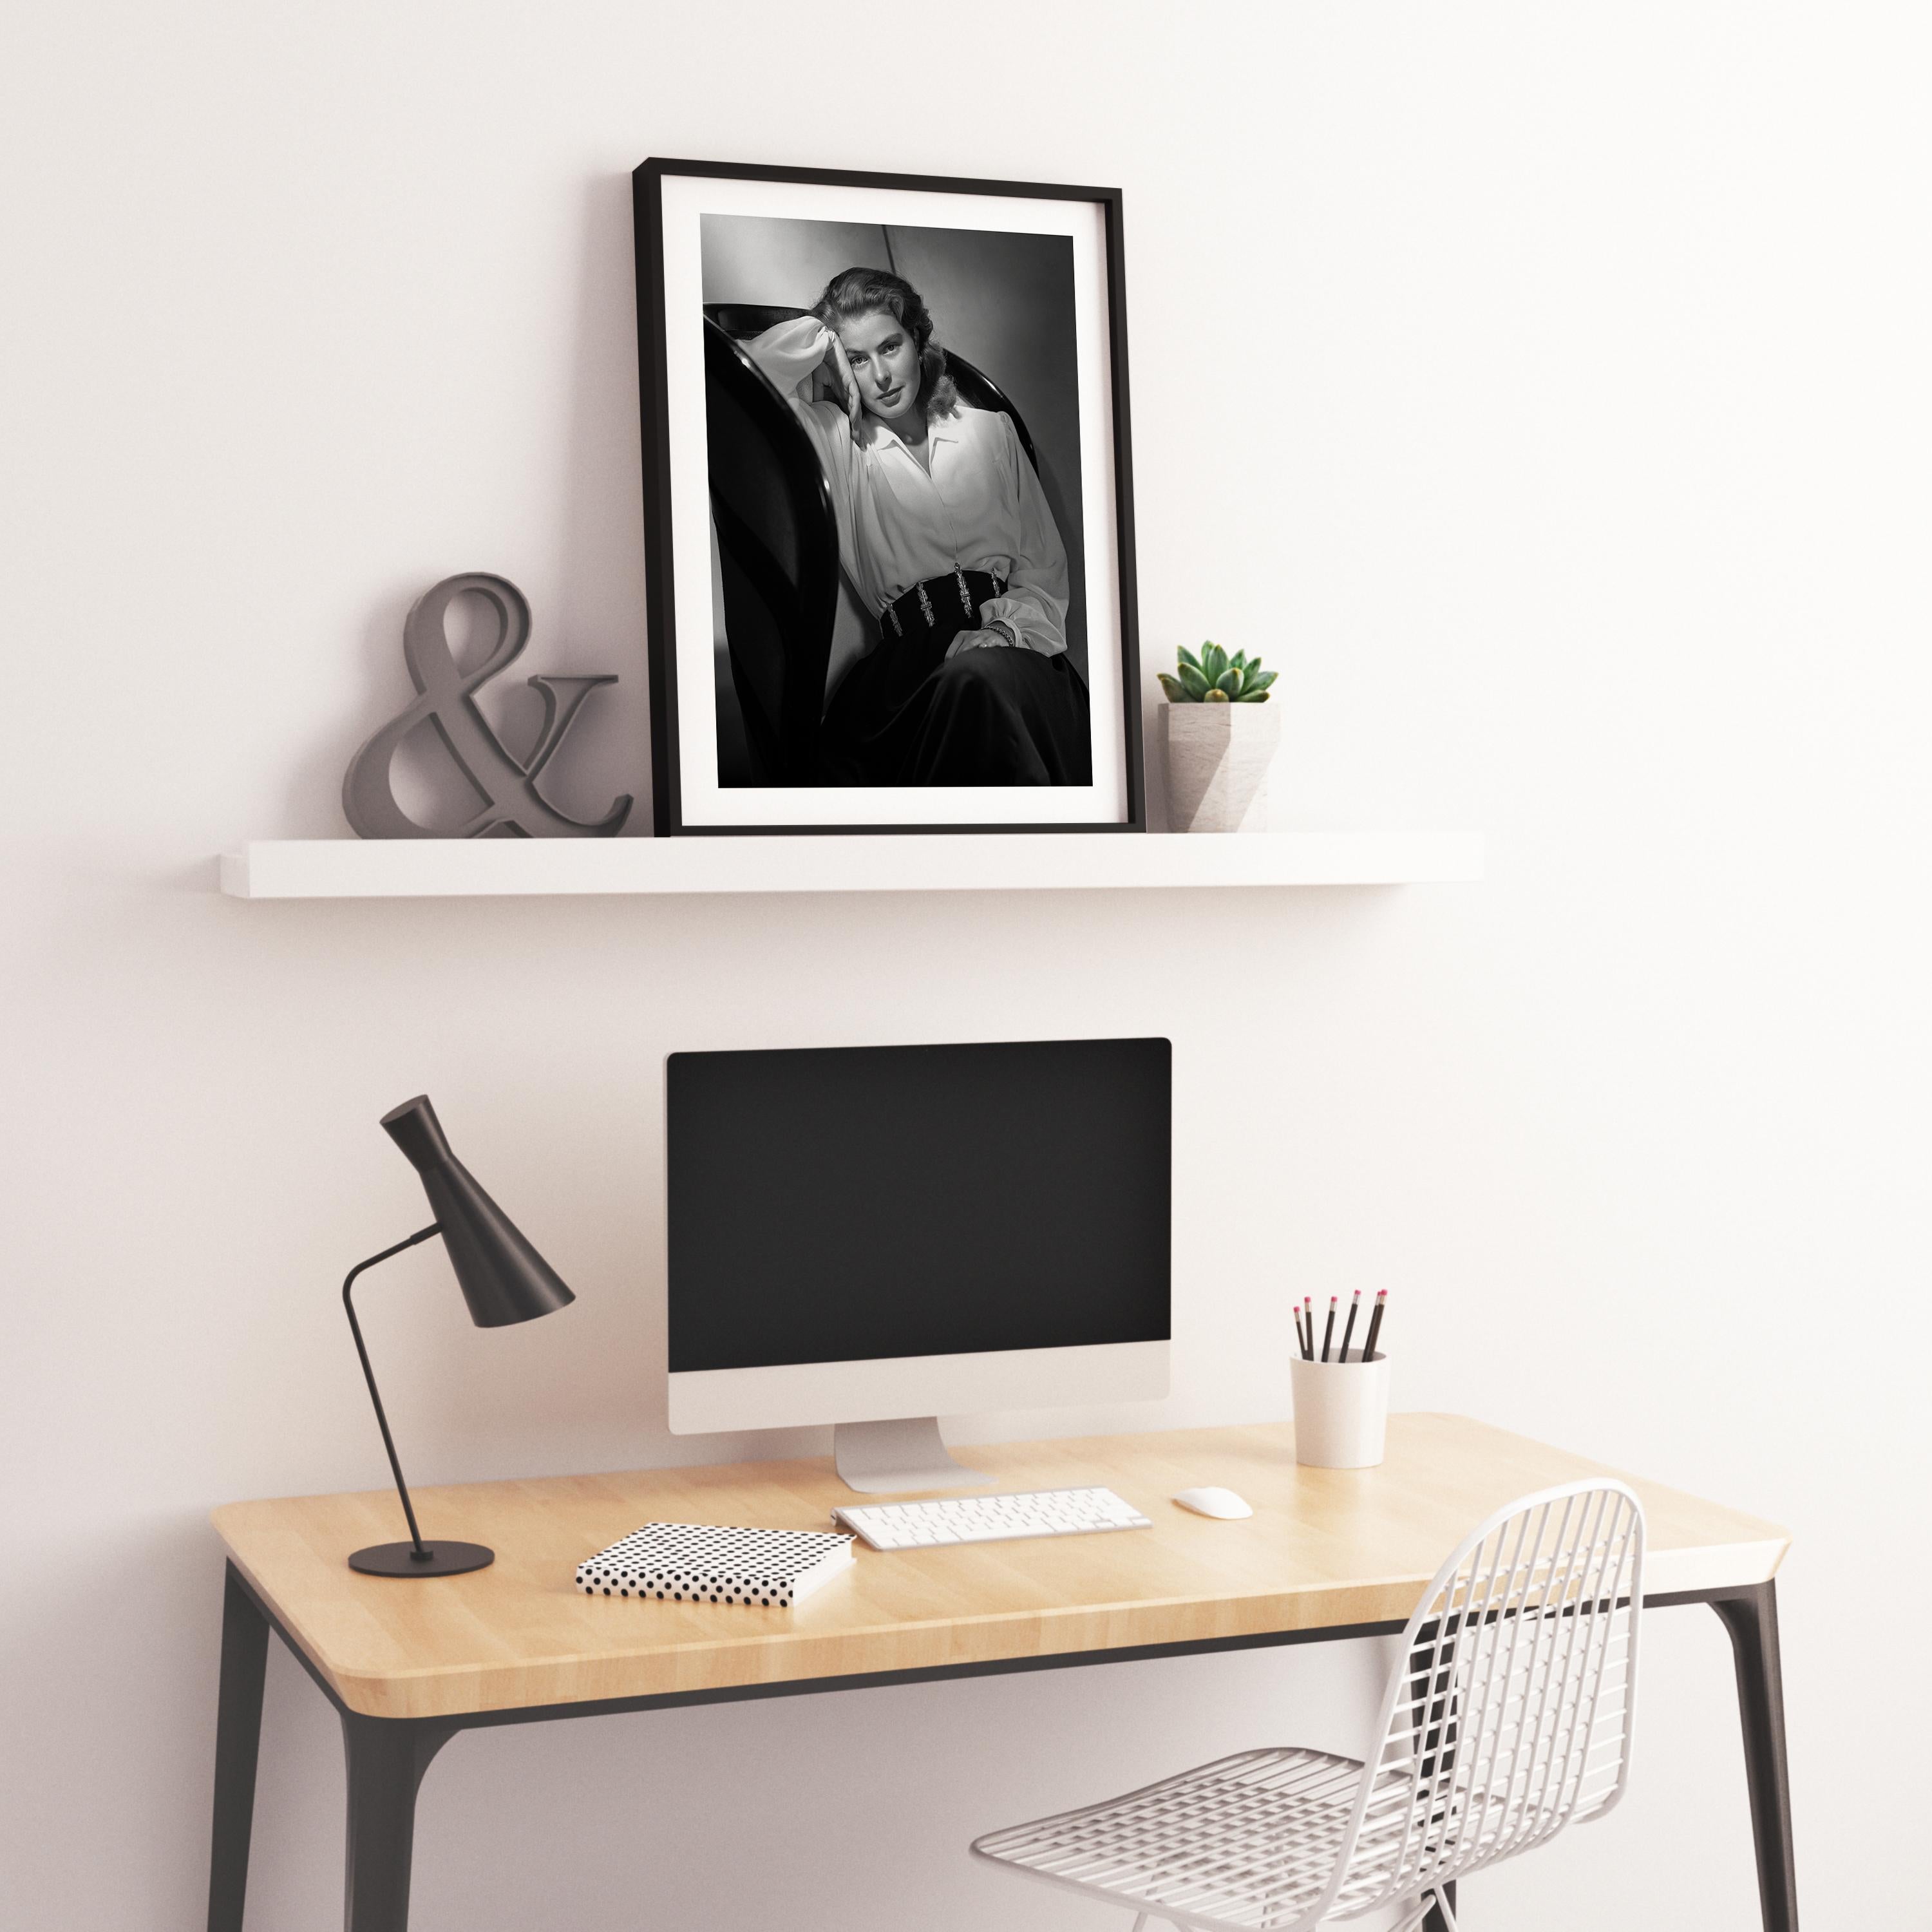 Ingrid Bergman Leaning in Chair Movie Star News Fine Art Print - Black Black and White Photograph by Unknown